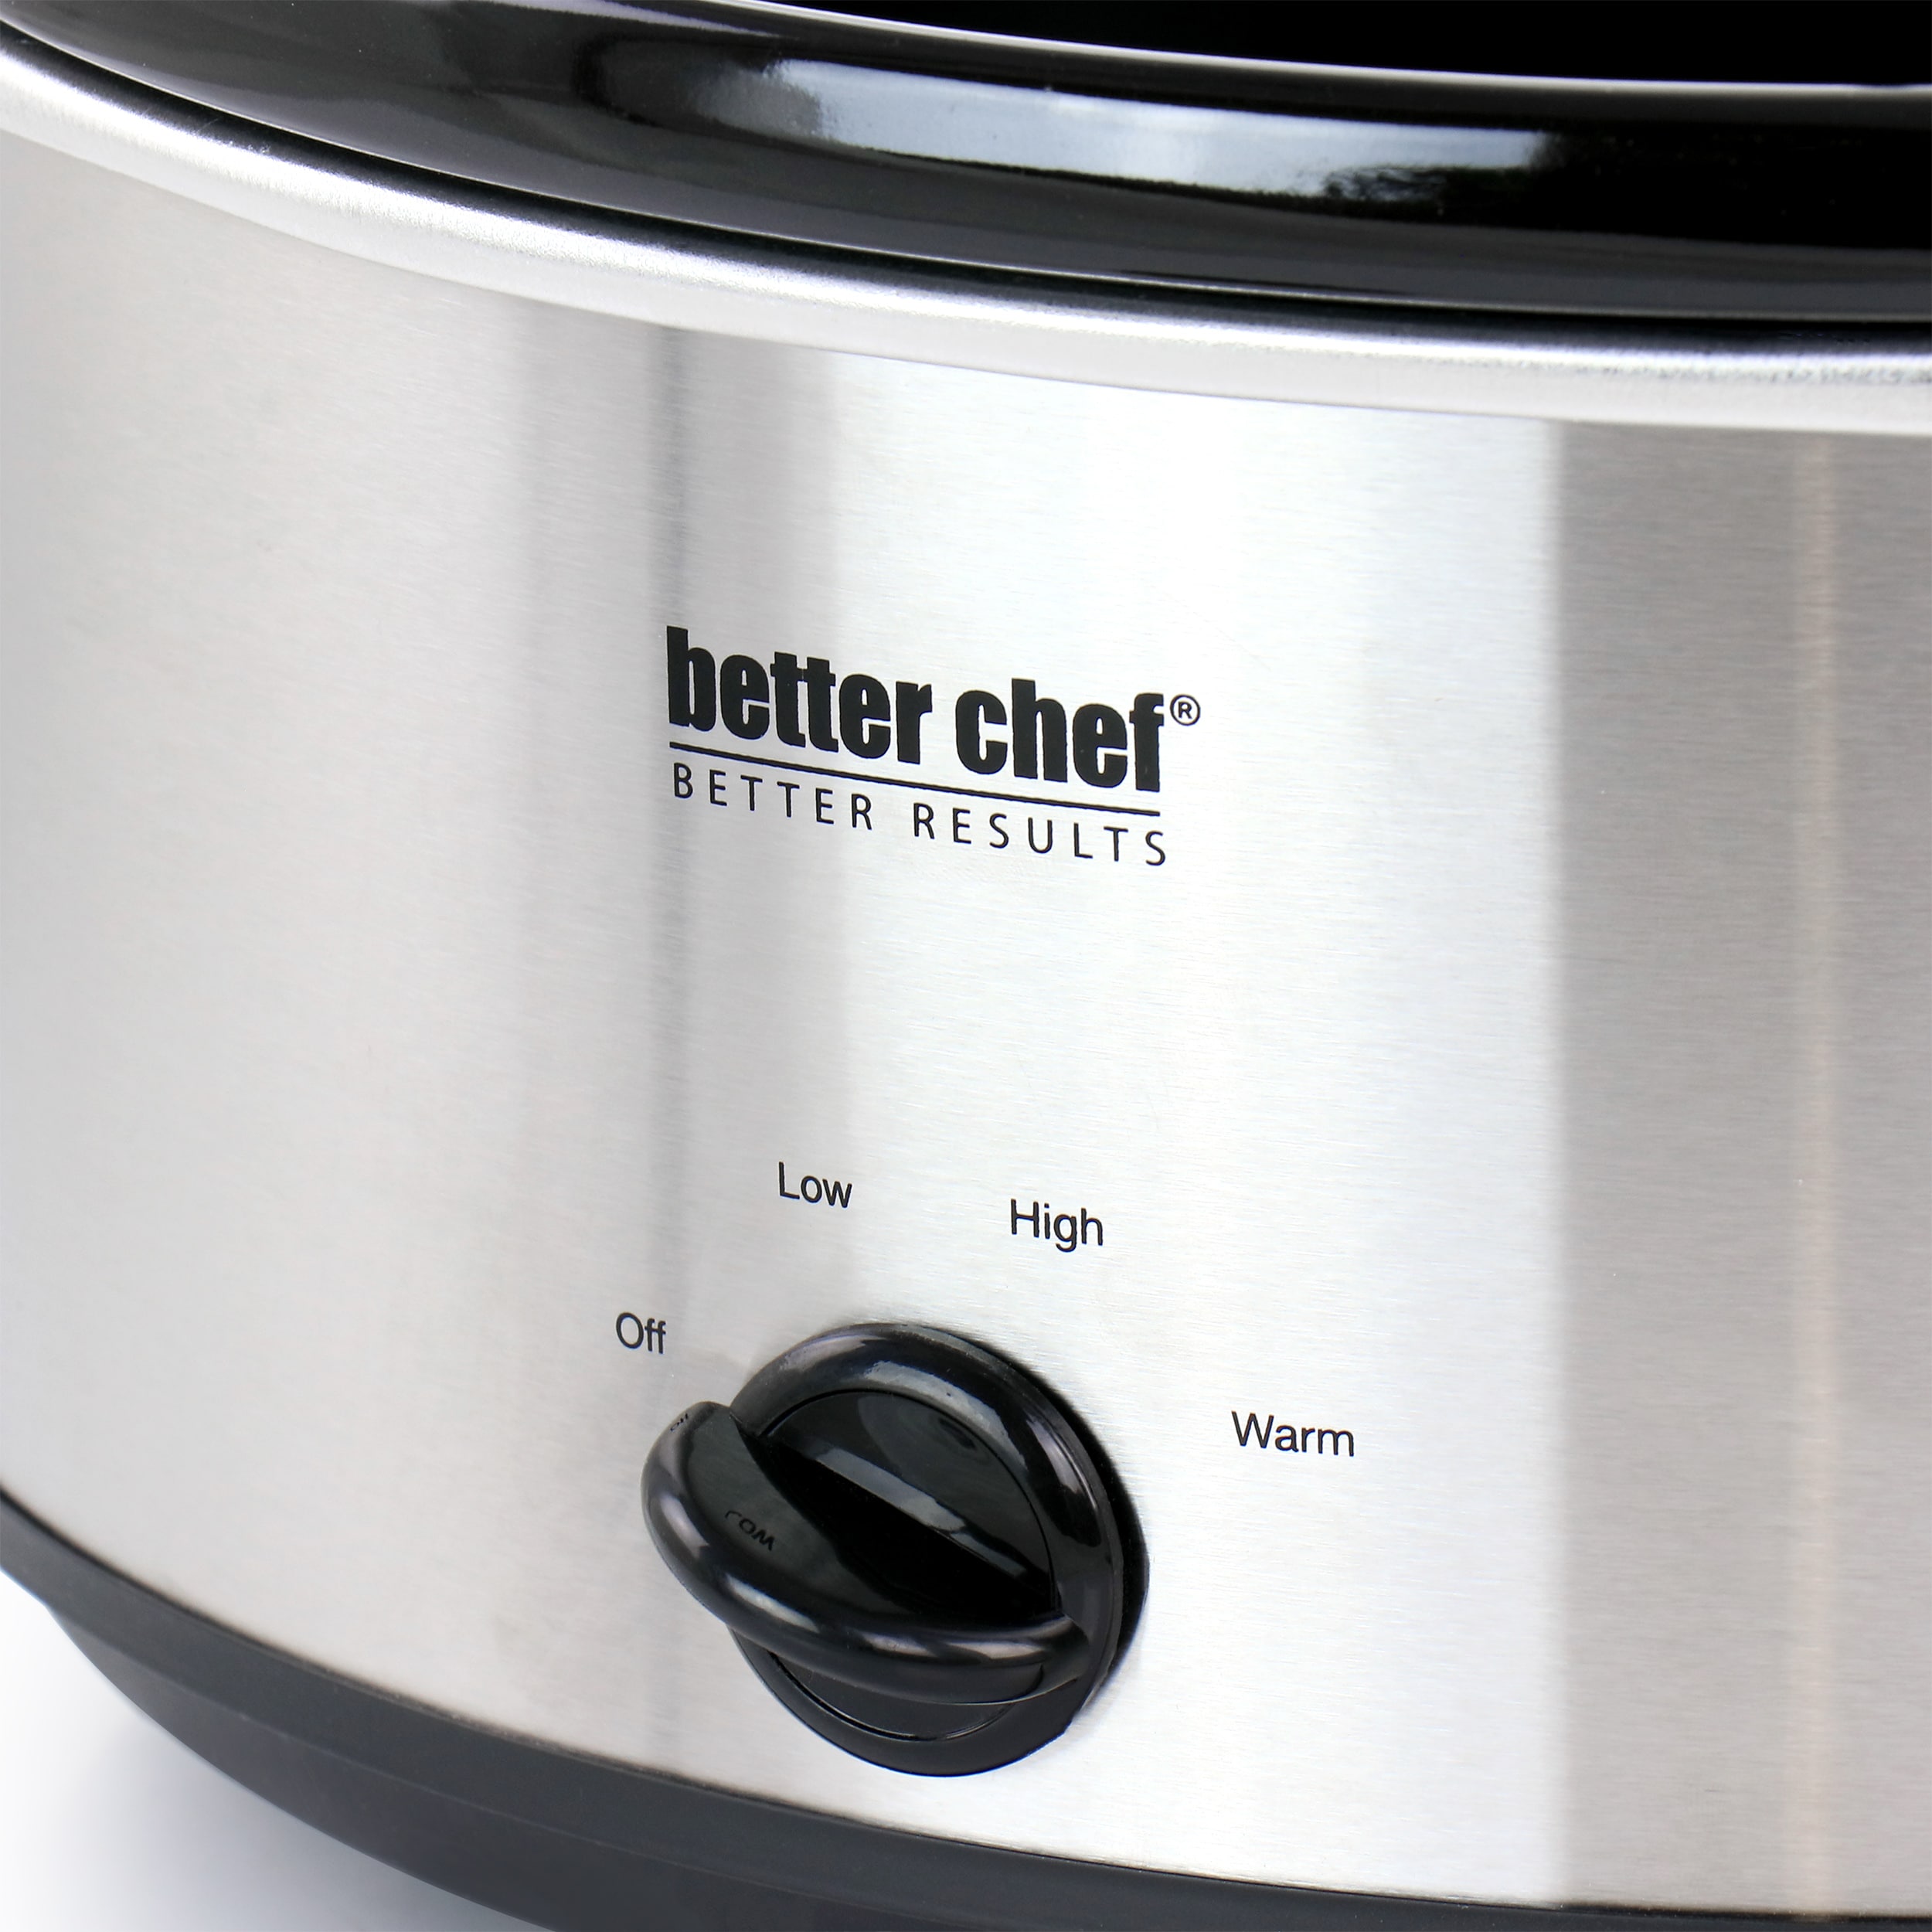 Stainless steel Slow Cookers at